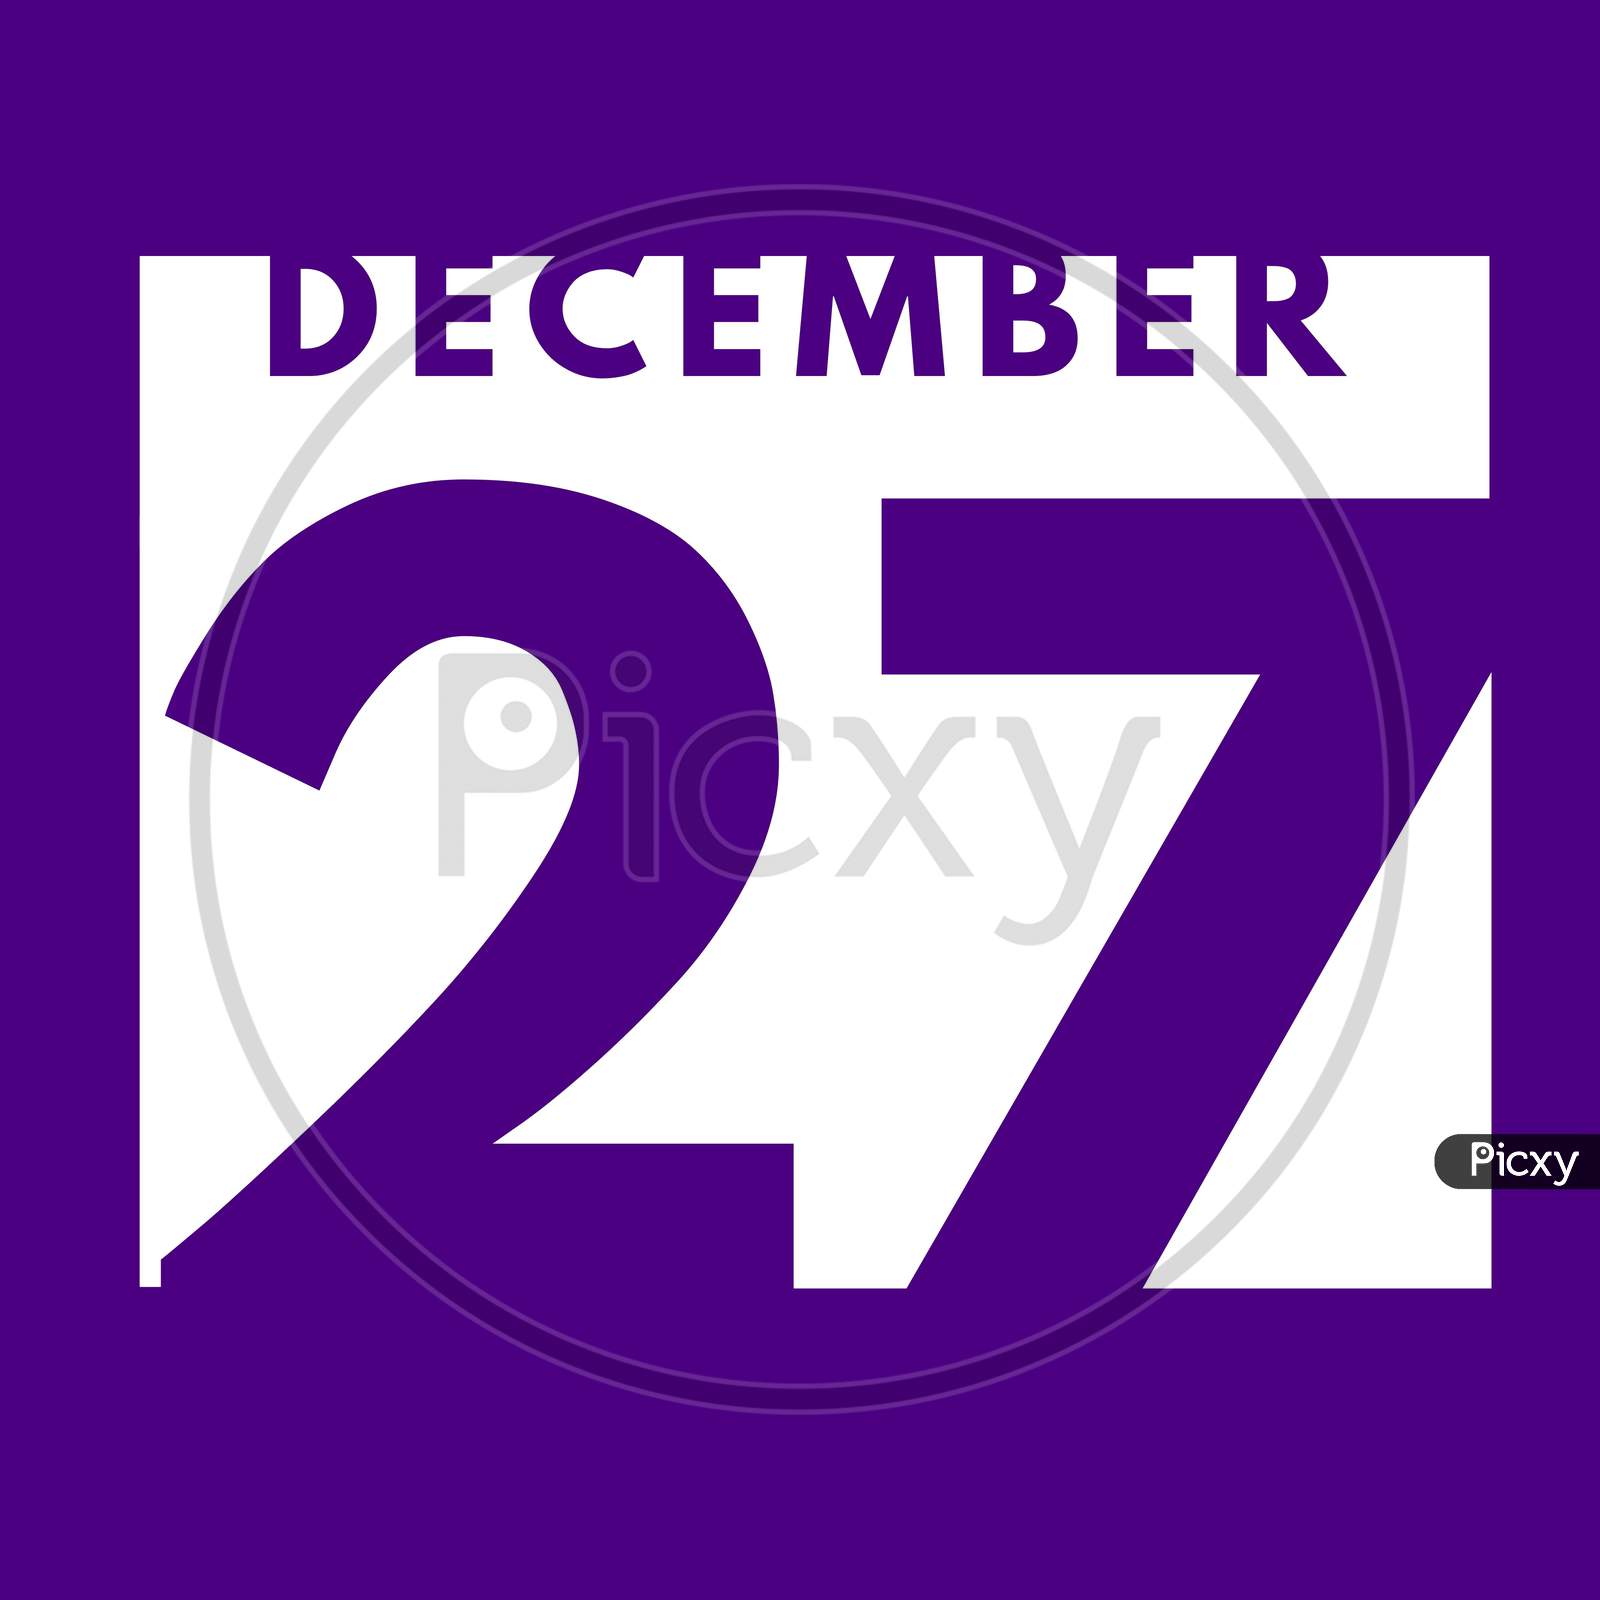 December 27 . Flat Modern Daily Calendar Icon .Date ,Day, Month .Calendar For The Month Of December